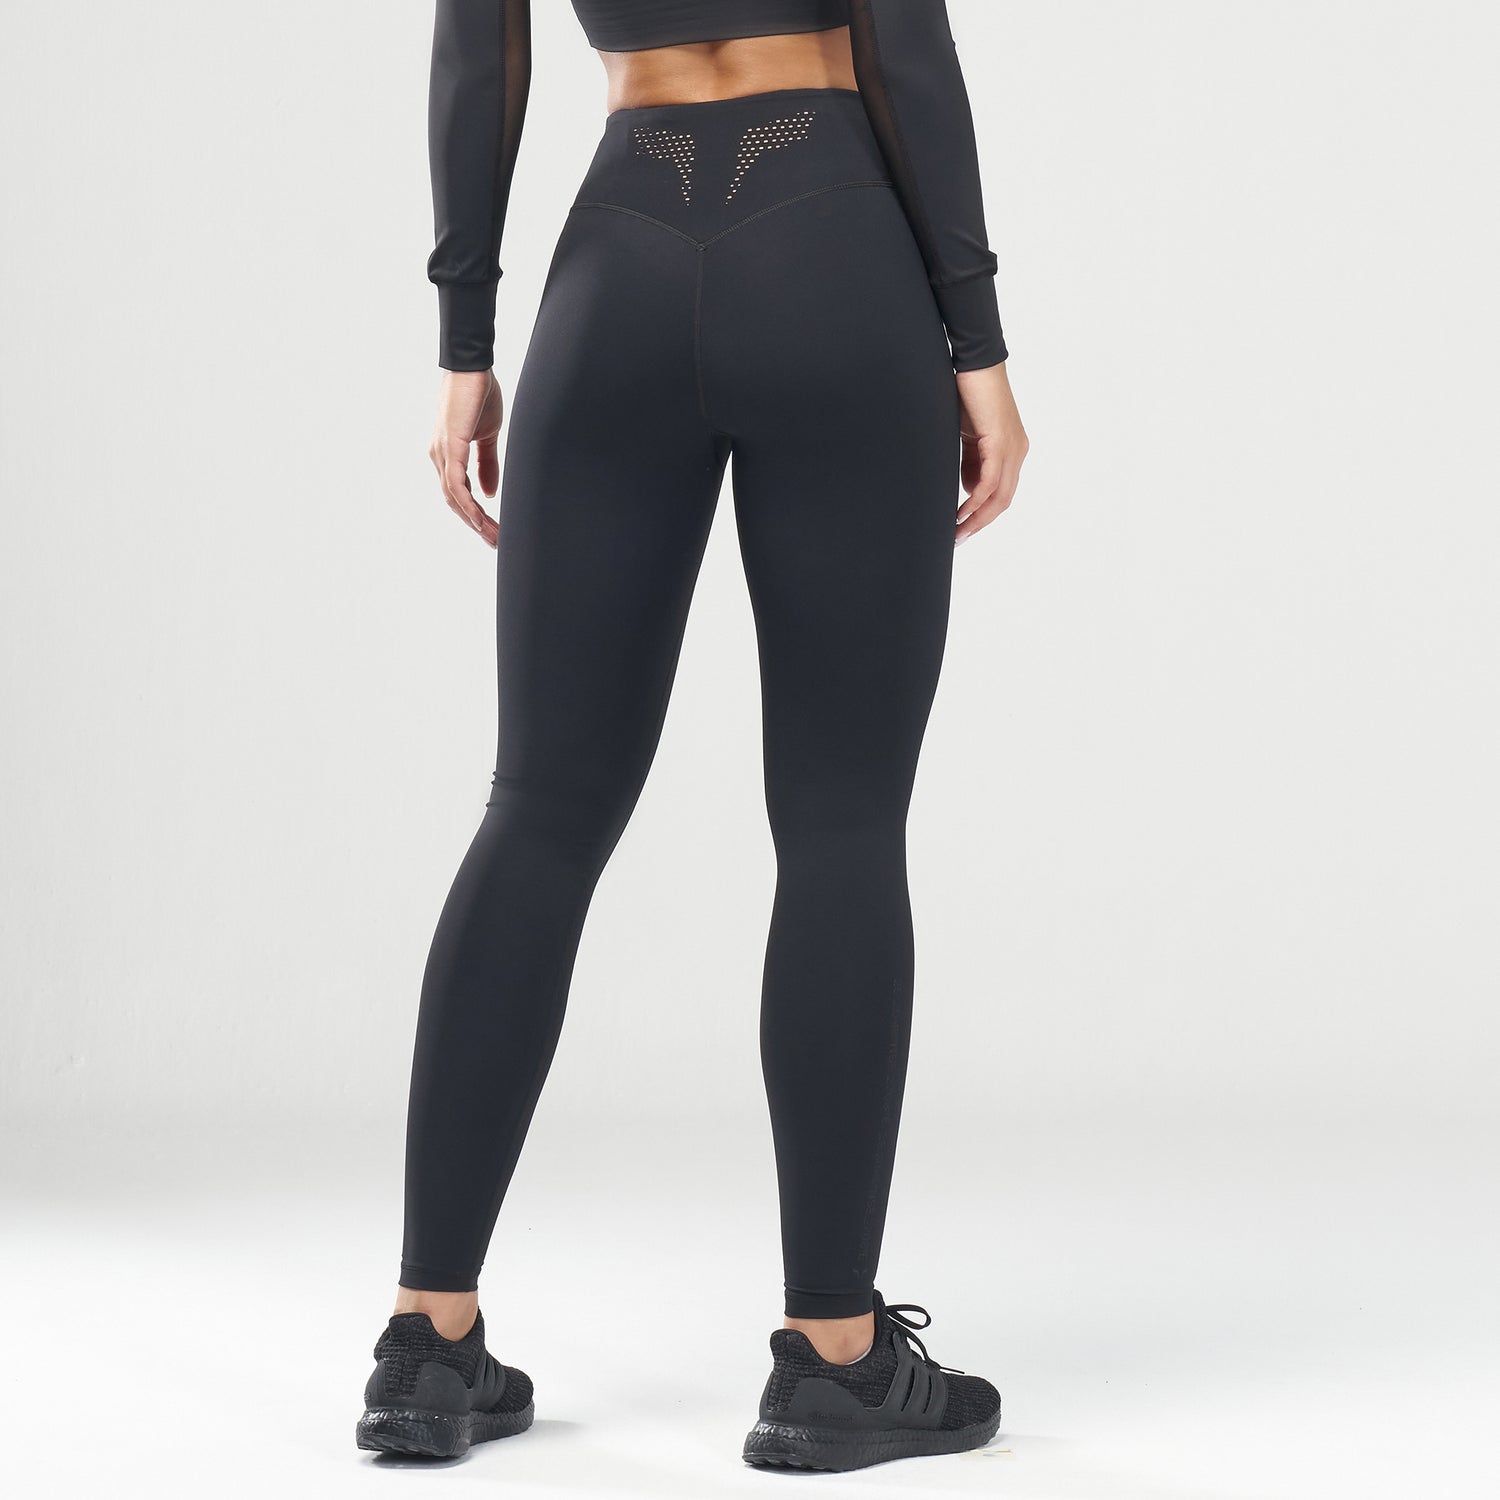 Scrub. Pub. Gym. Streets. These leggings are for them all! Built